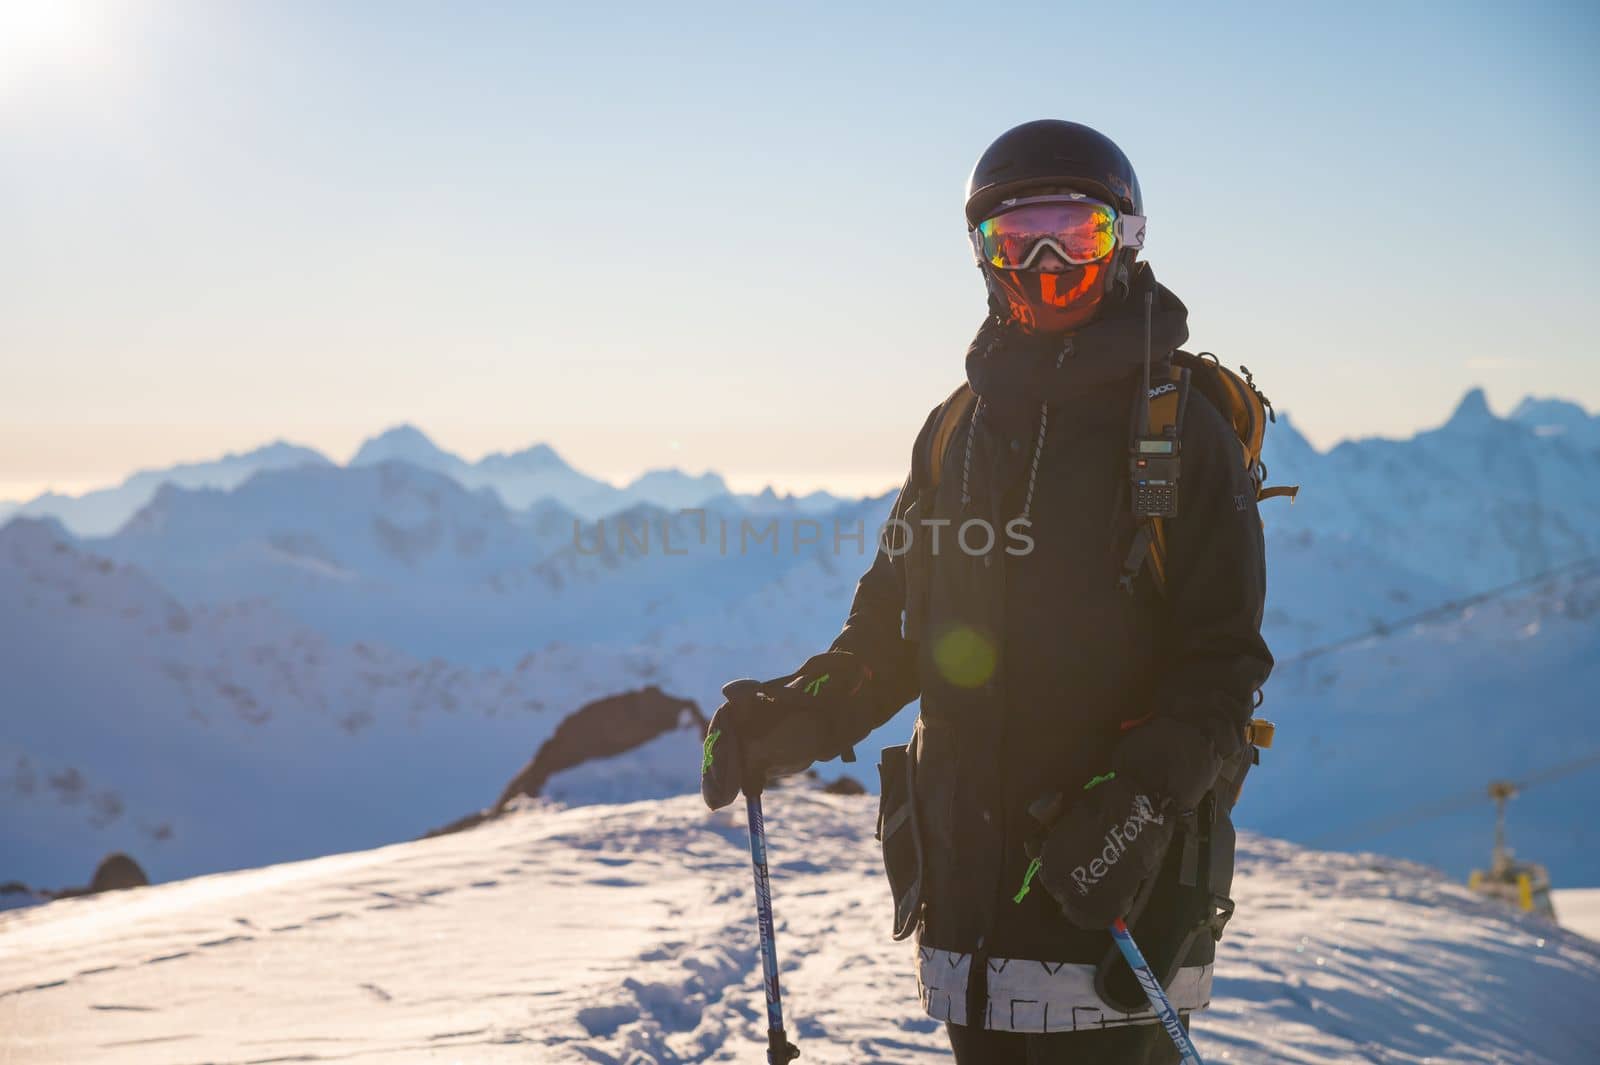 A skier in a fashionable jacket and with a backpack stands on skis against the backdrop of the Caucasus Mountains and a ski resort on a sunny day. Woman on vacation doing winter sports.